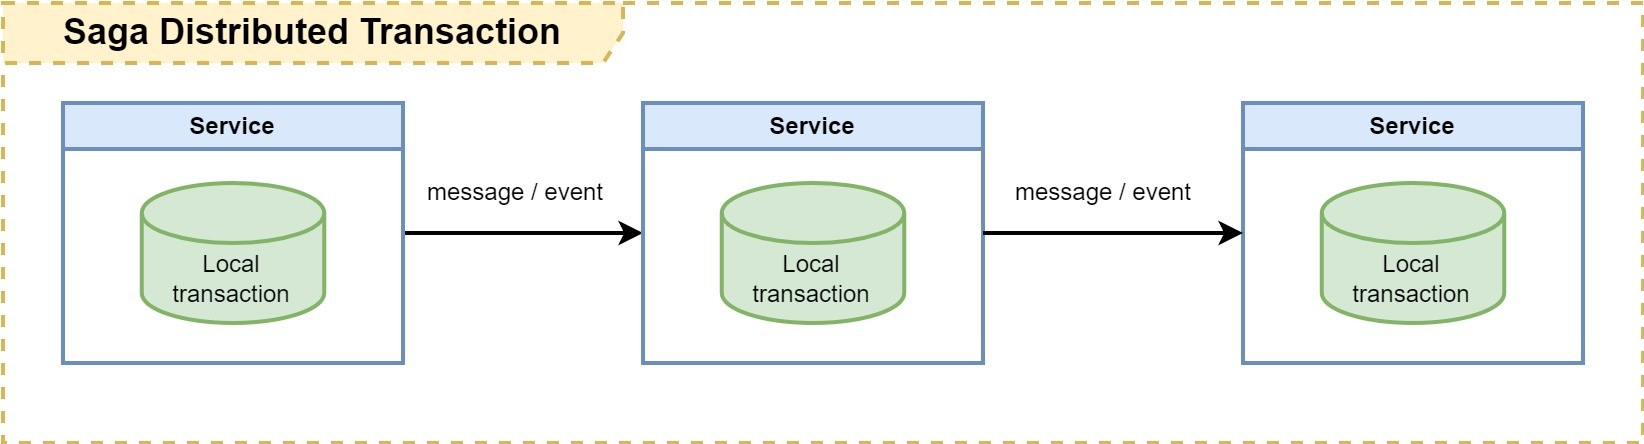 Implement a distributed transaction in microservices software system using Saga pattern.webp